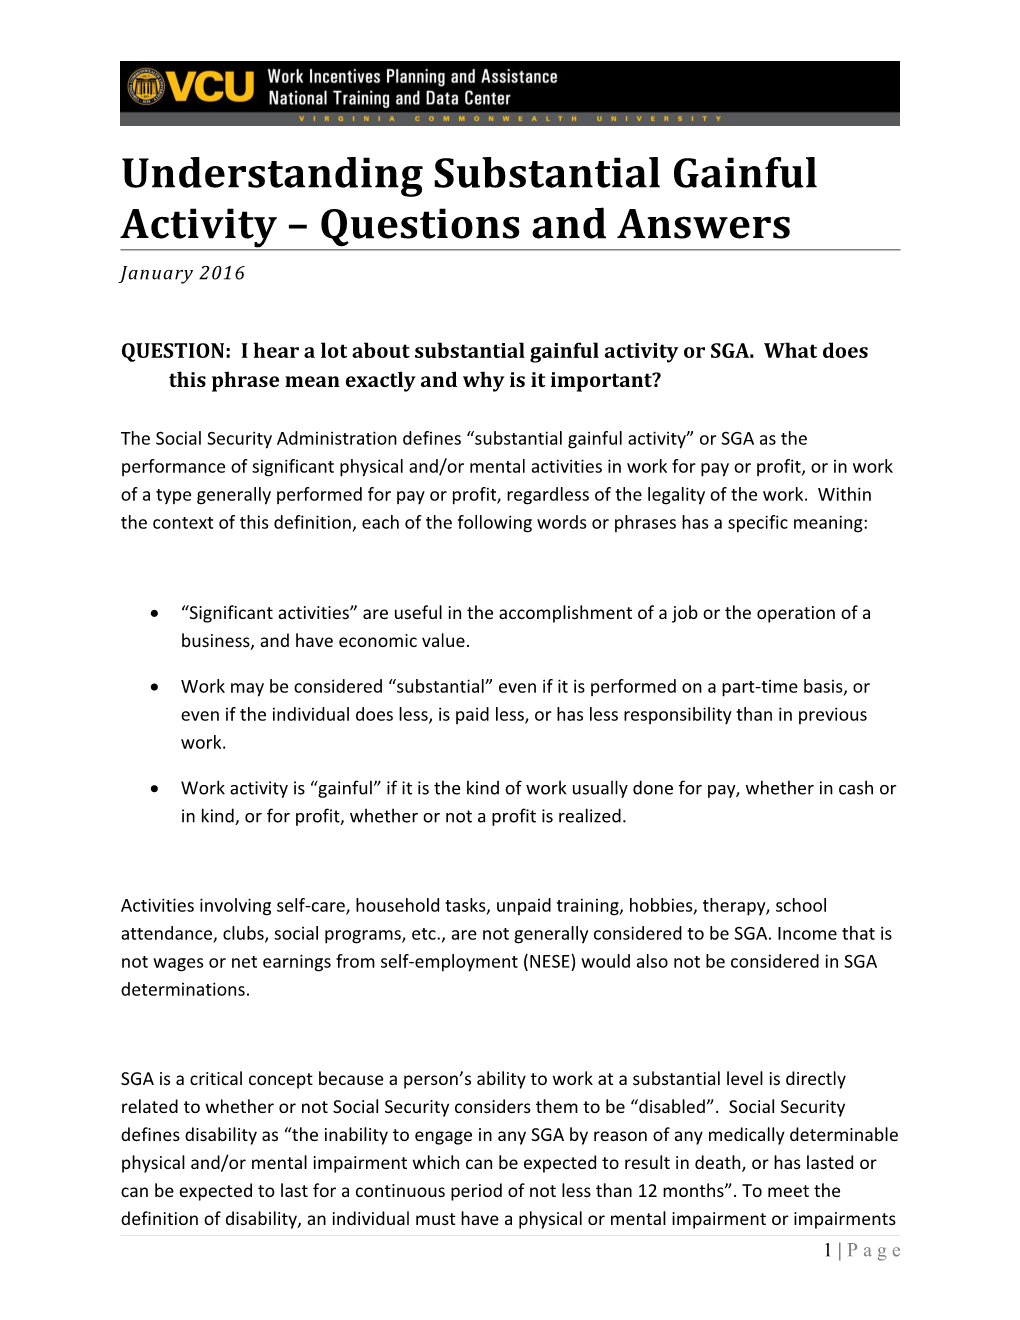 Understanding Substantial Gainful Activity Questions and Answers